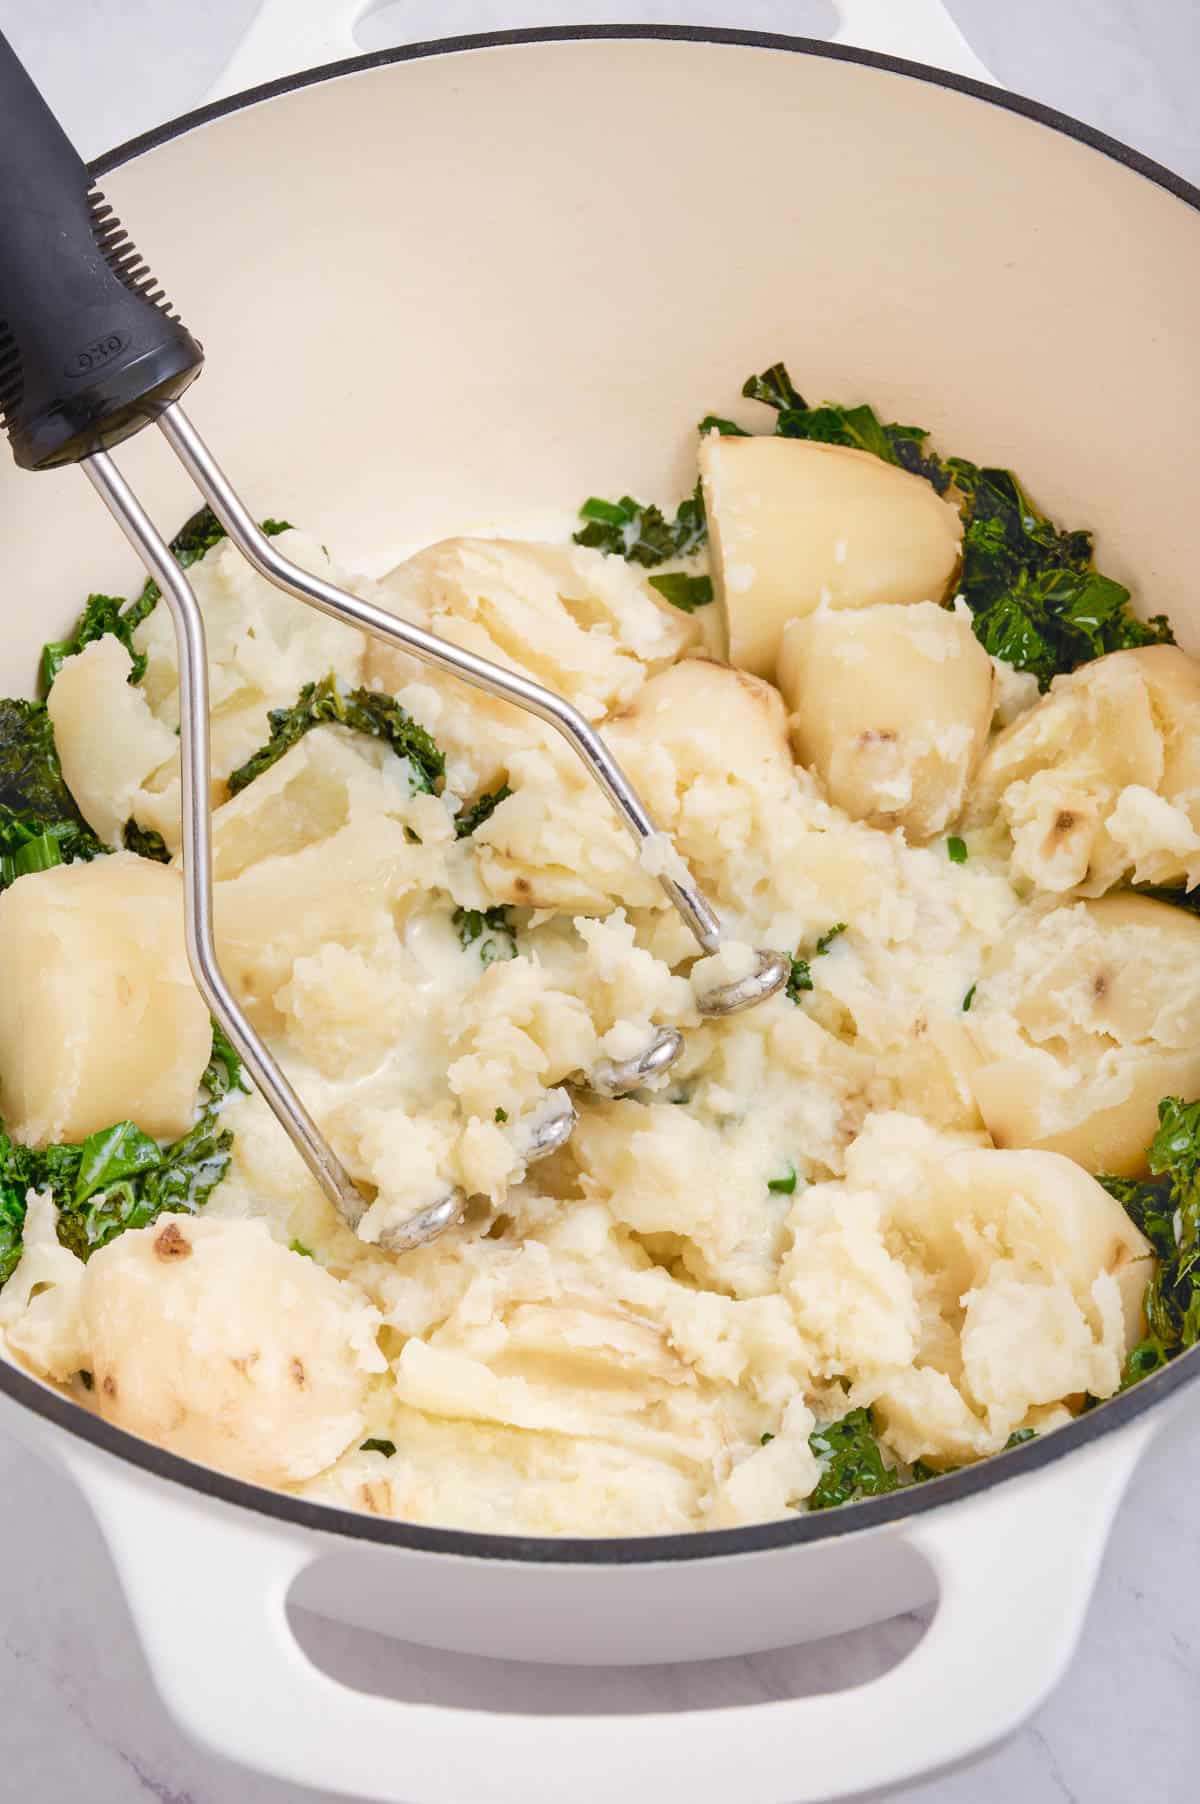 Potatoes are returned to the kale and mashed.